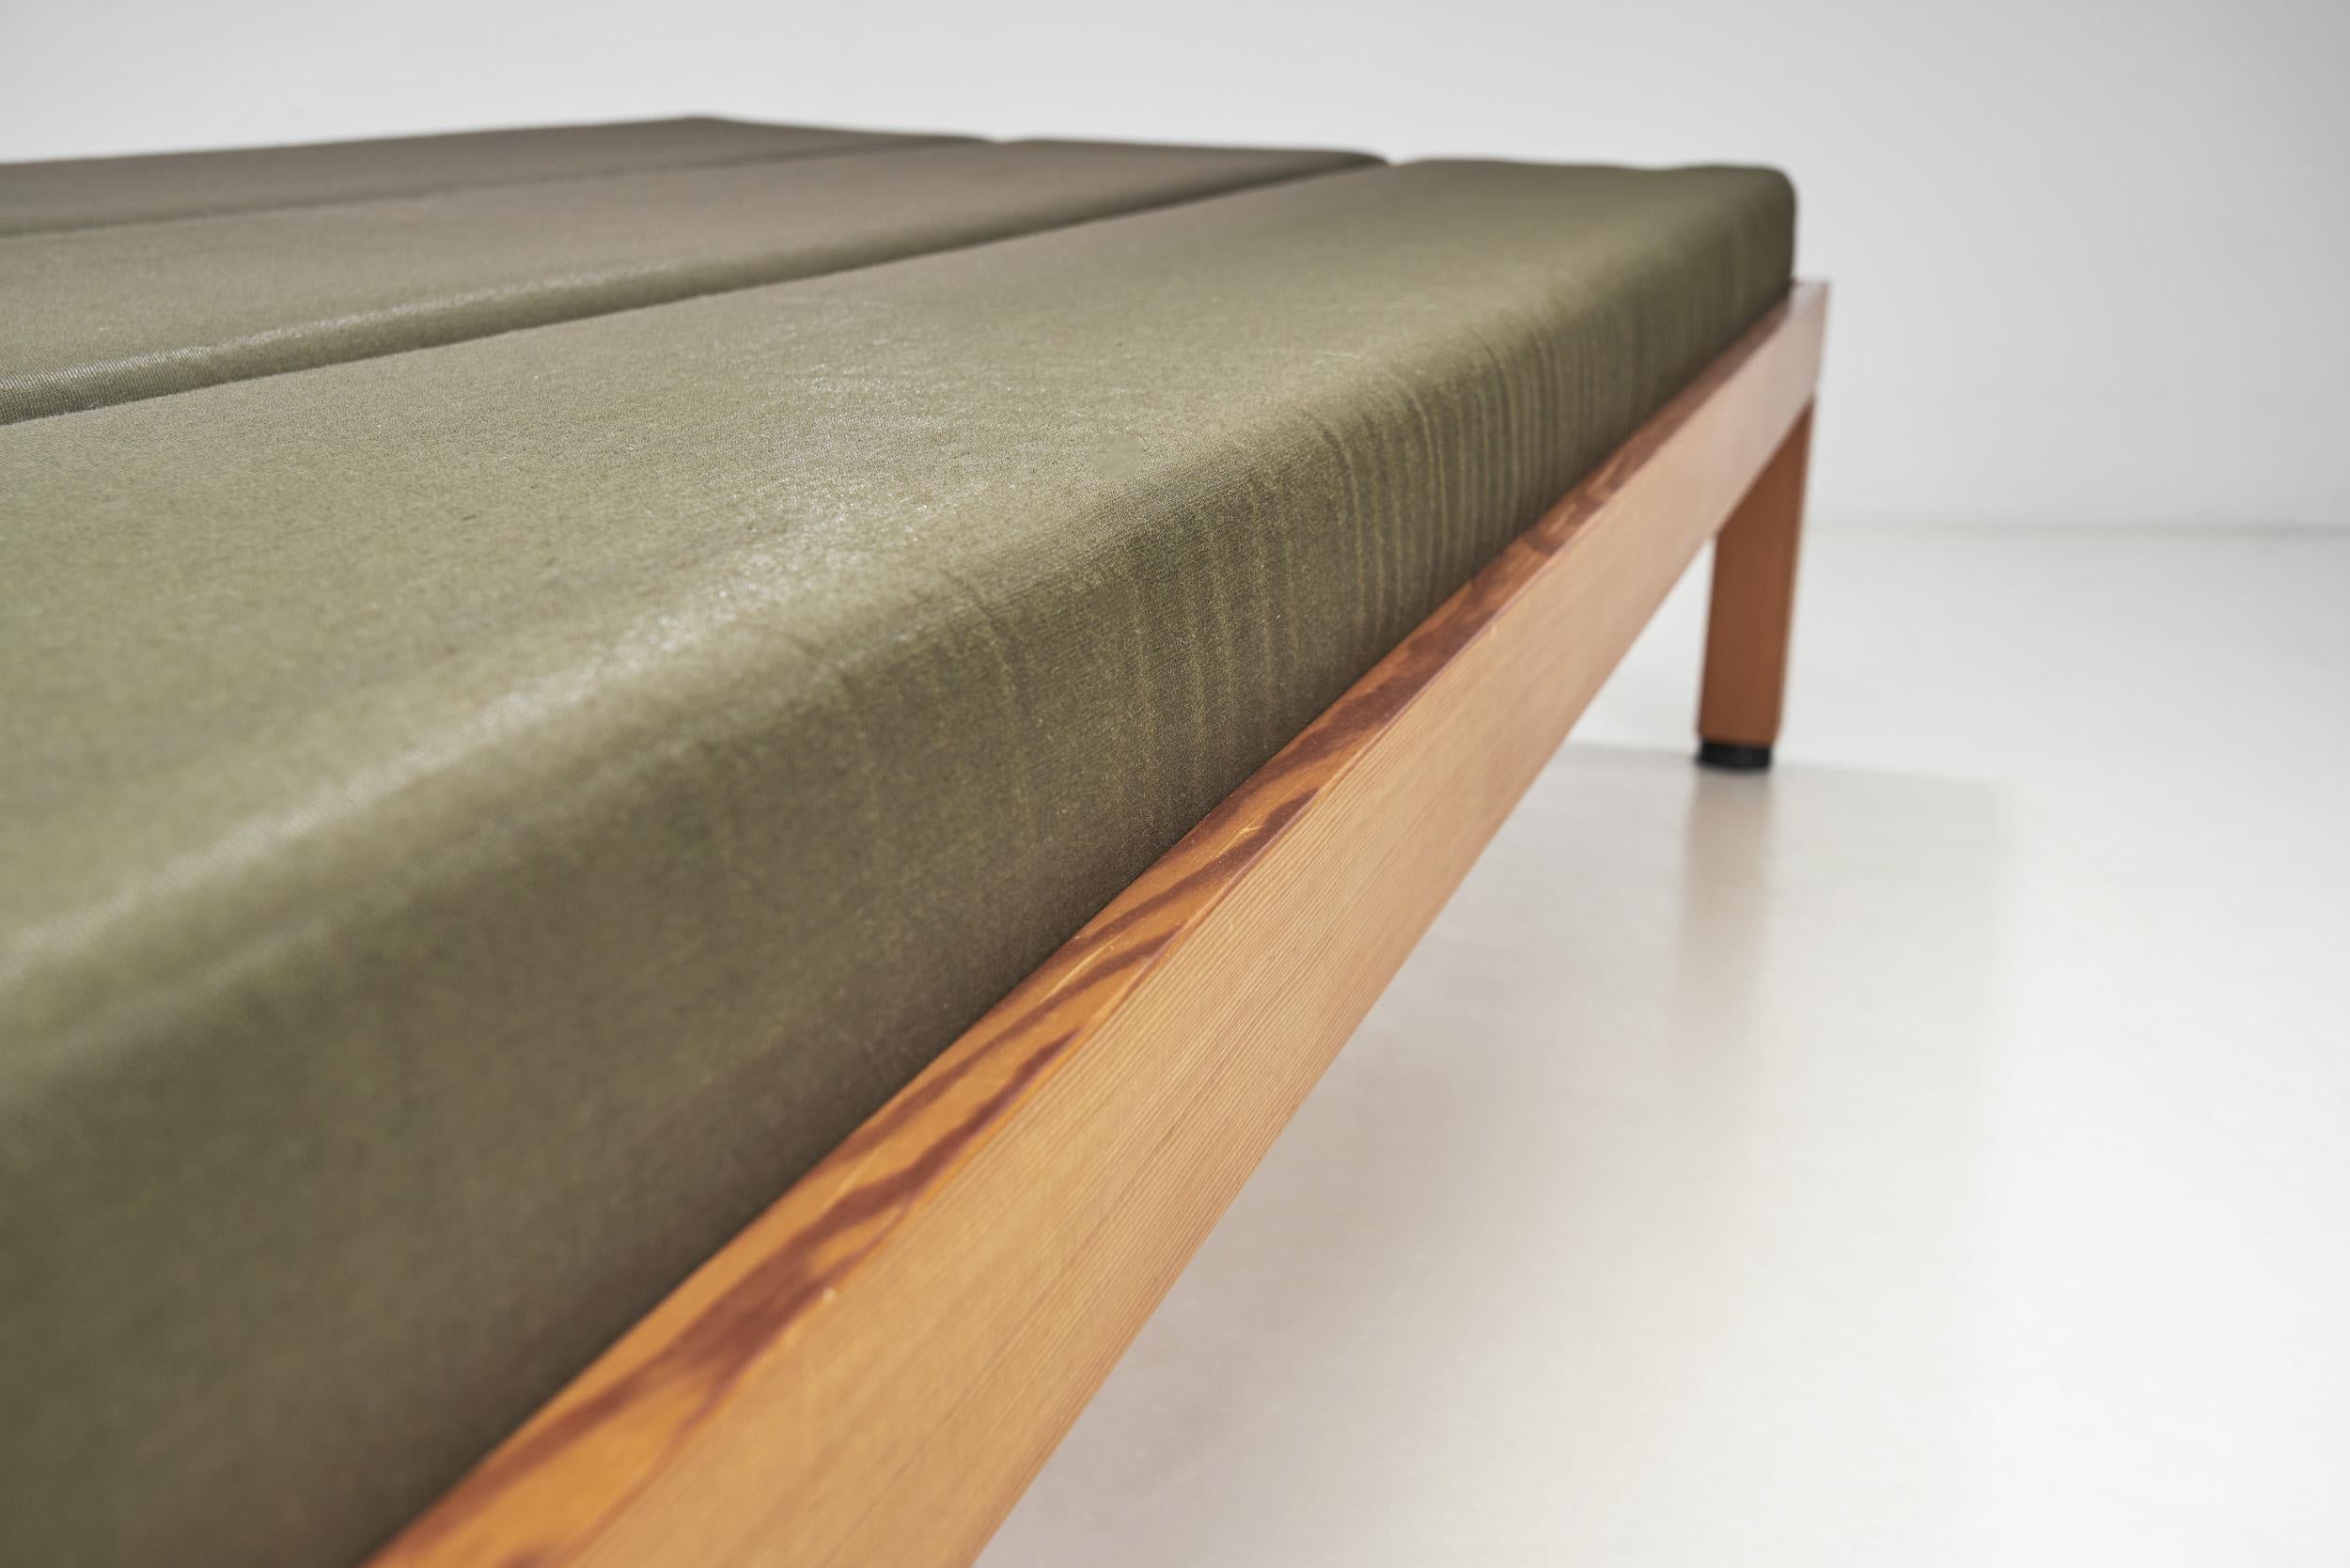 A Haroma, Saarinen, and Salo Design Collaboration Daybed, Finland 1960 For Sale 3